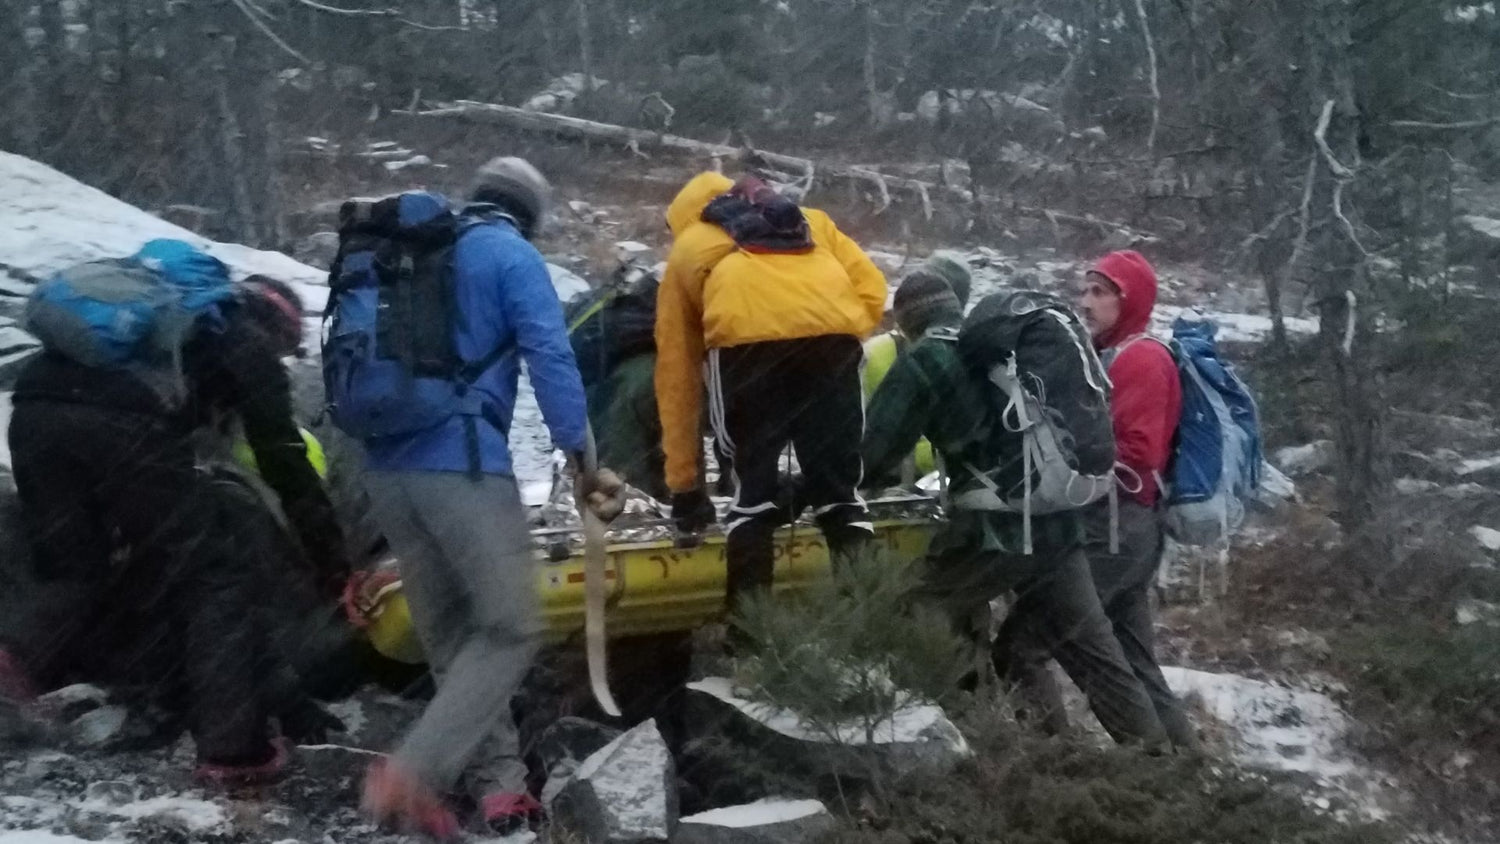 Injured hiker being carried off Moat Mountain